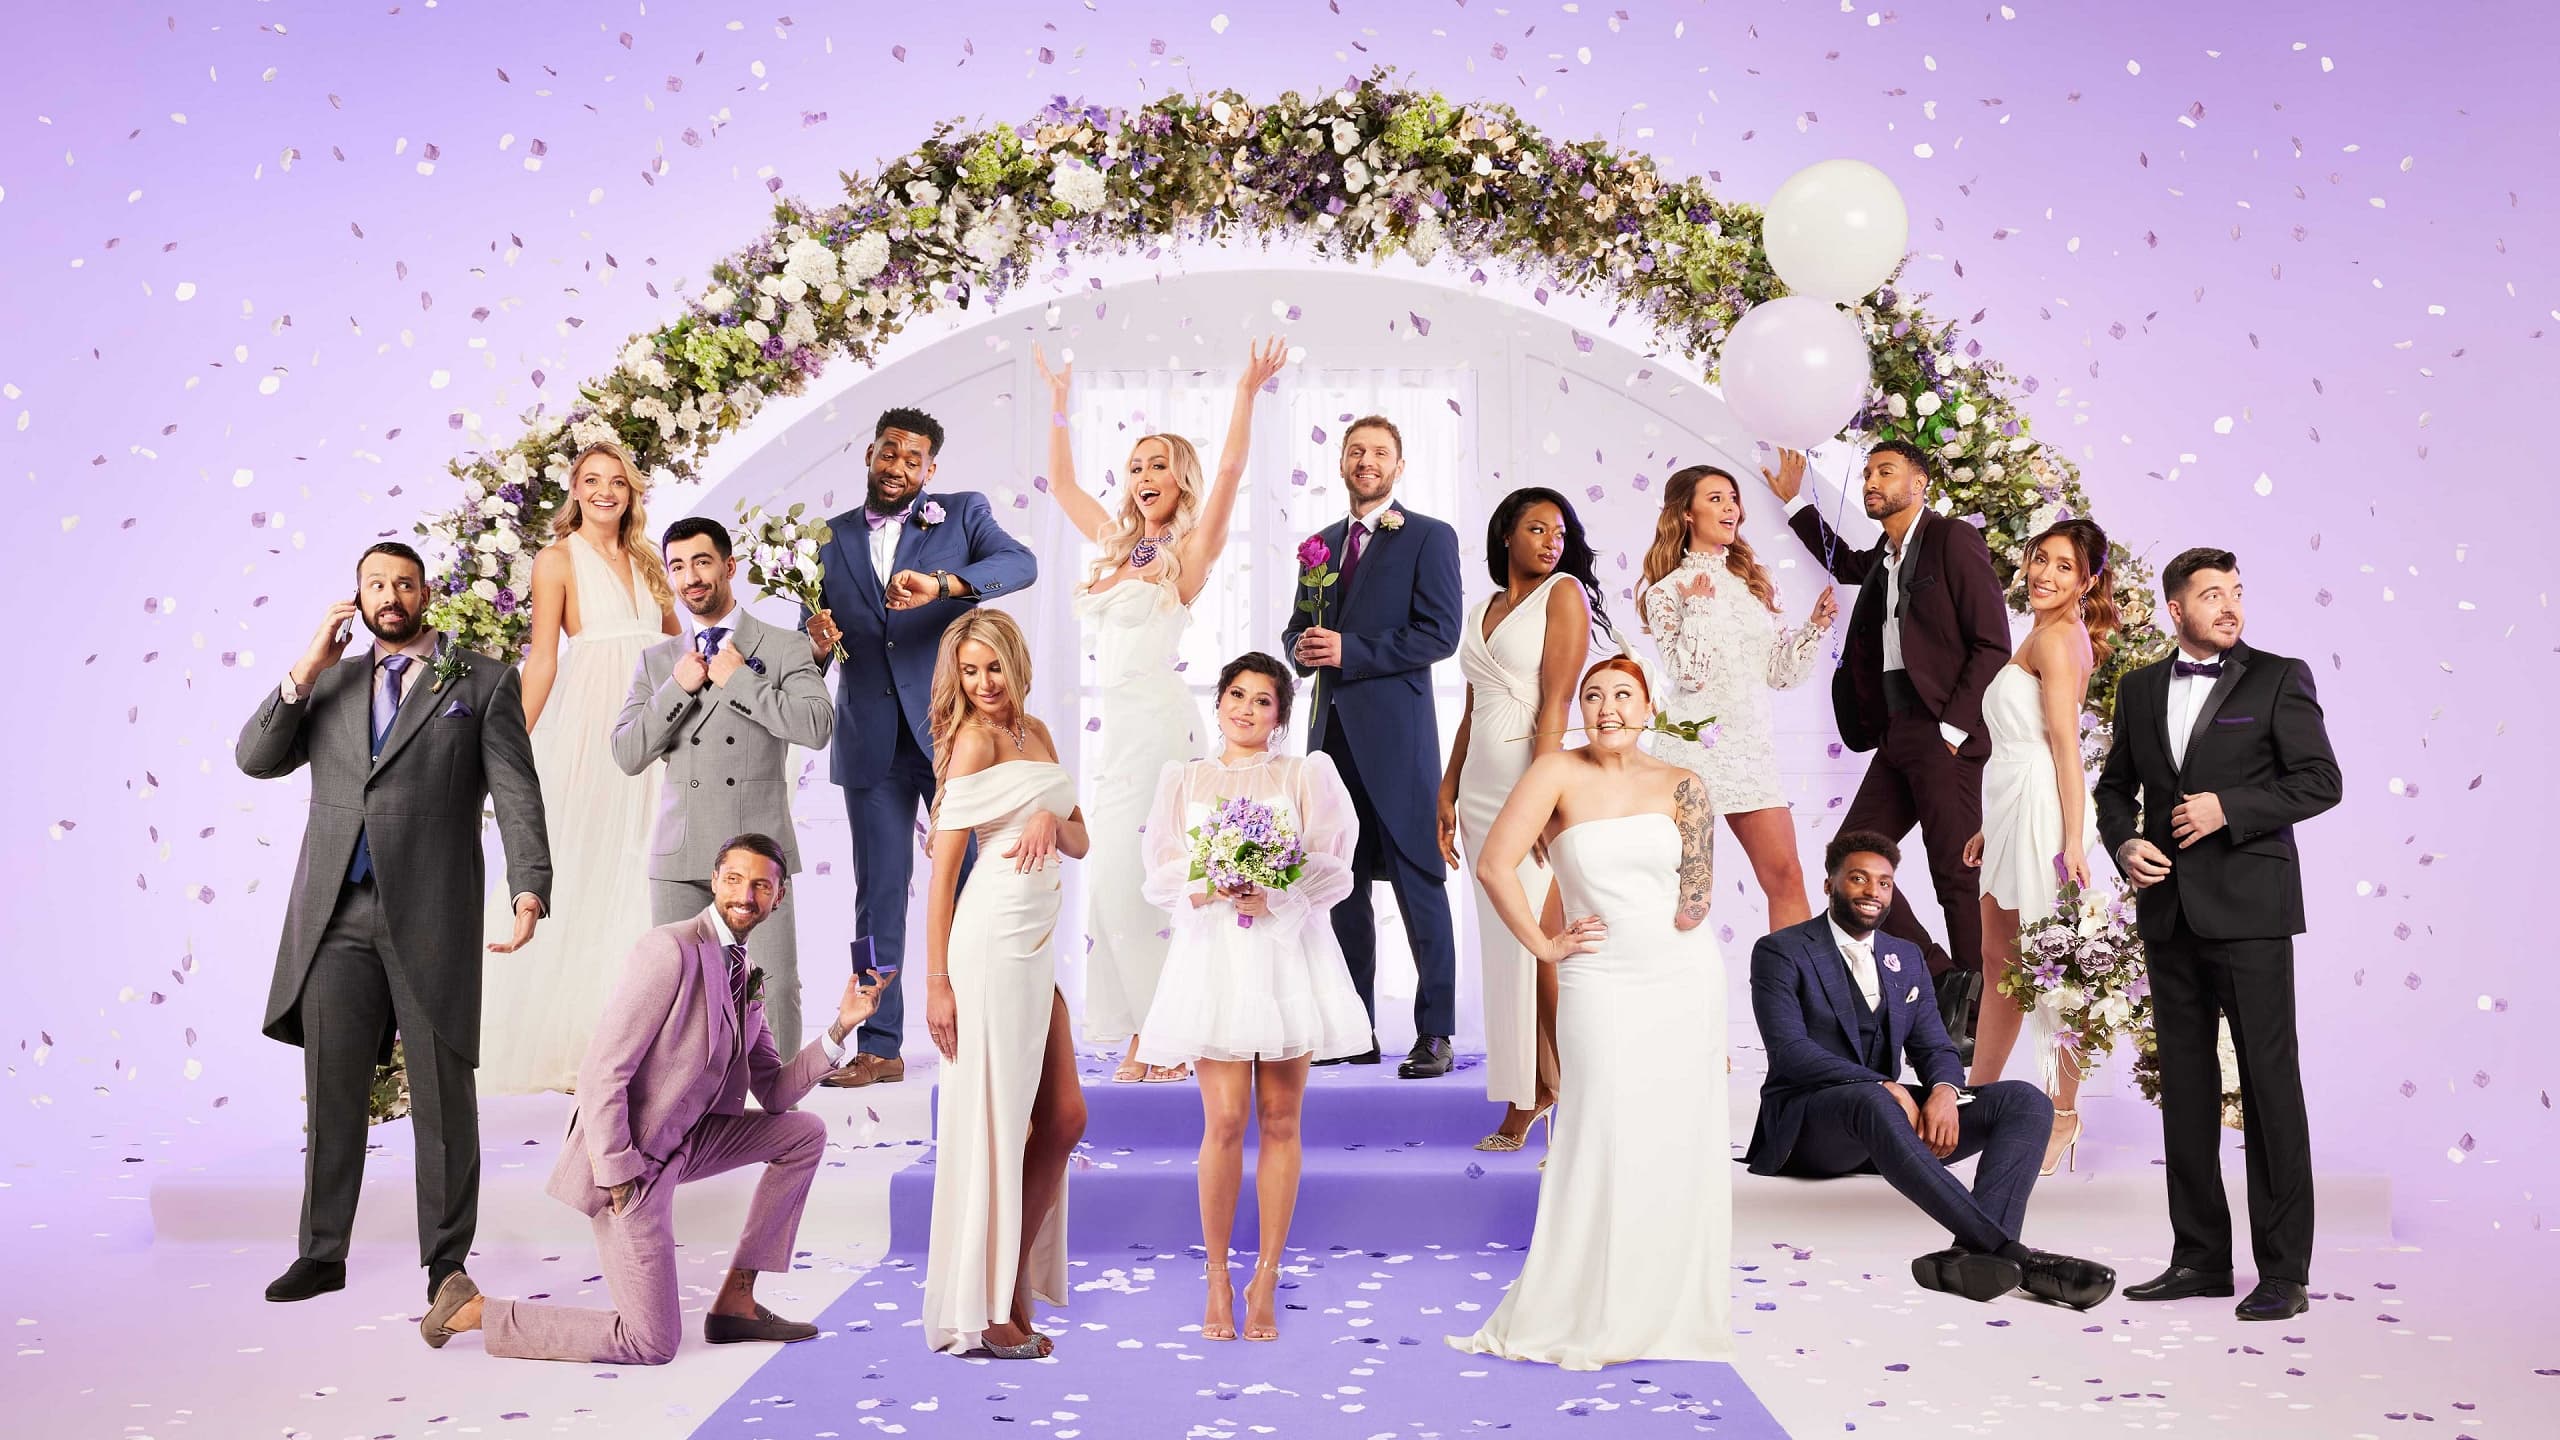 Married at First Sight UK - Season 8 Episode 10